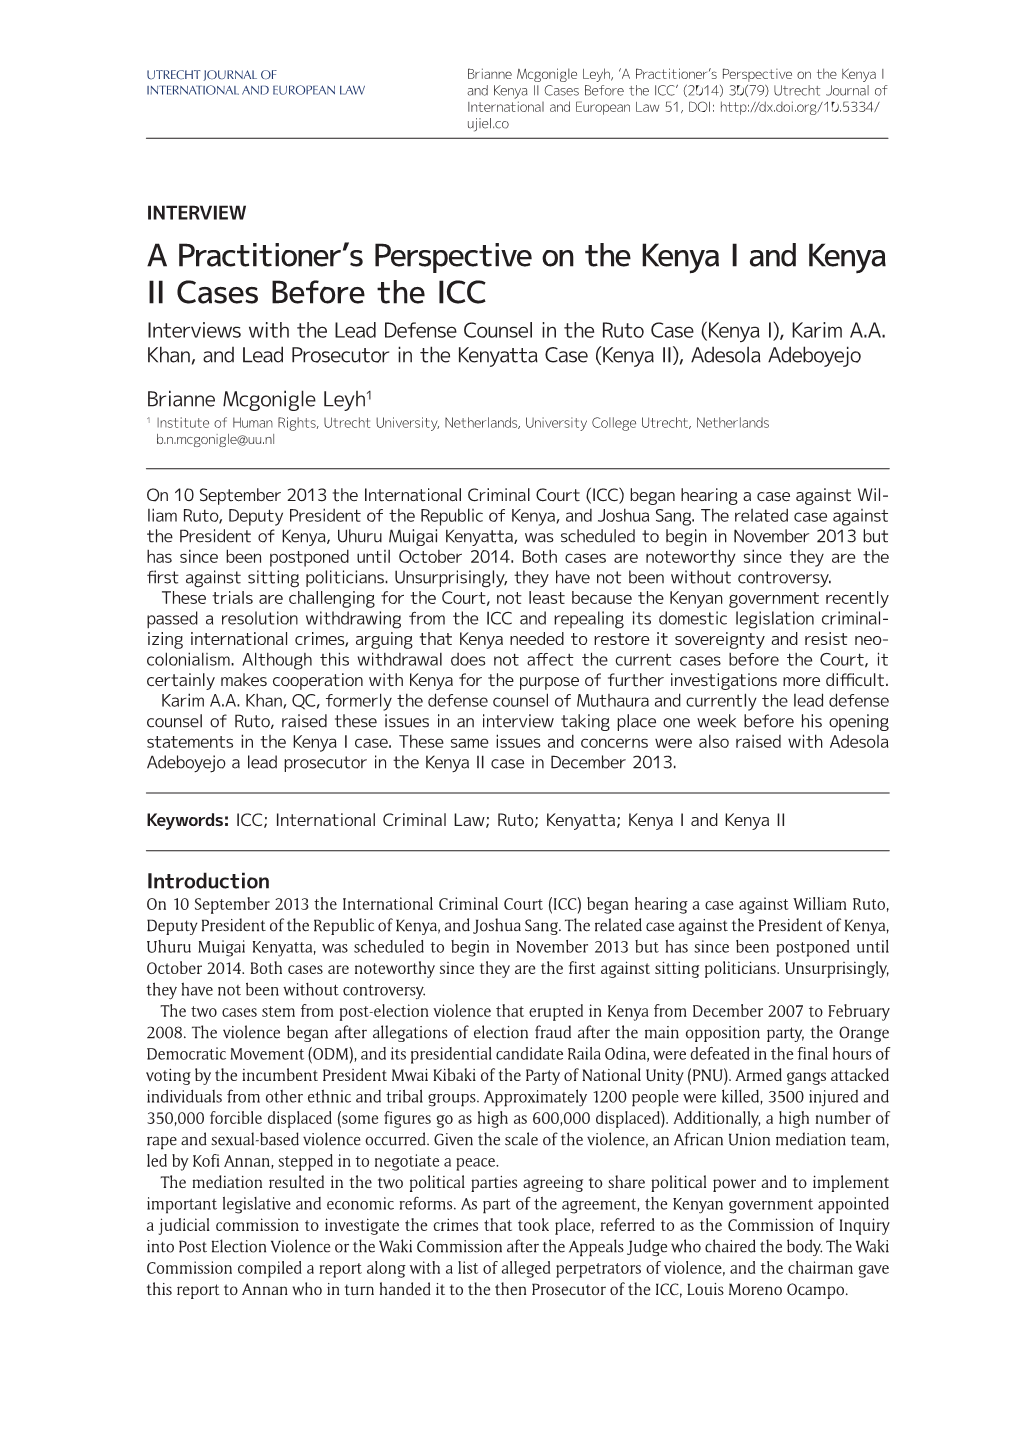 A Practitioner's Perspective on the Kenya I and Kenya II Cases Before The